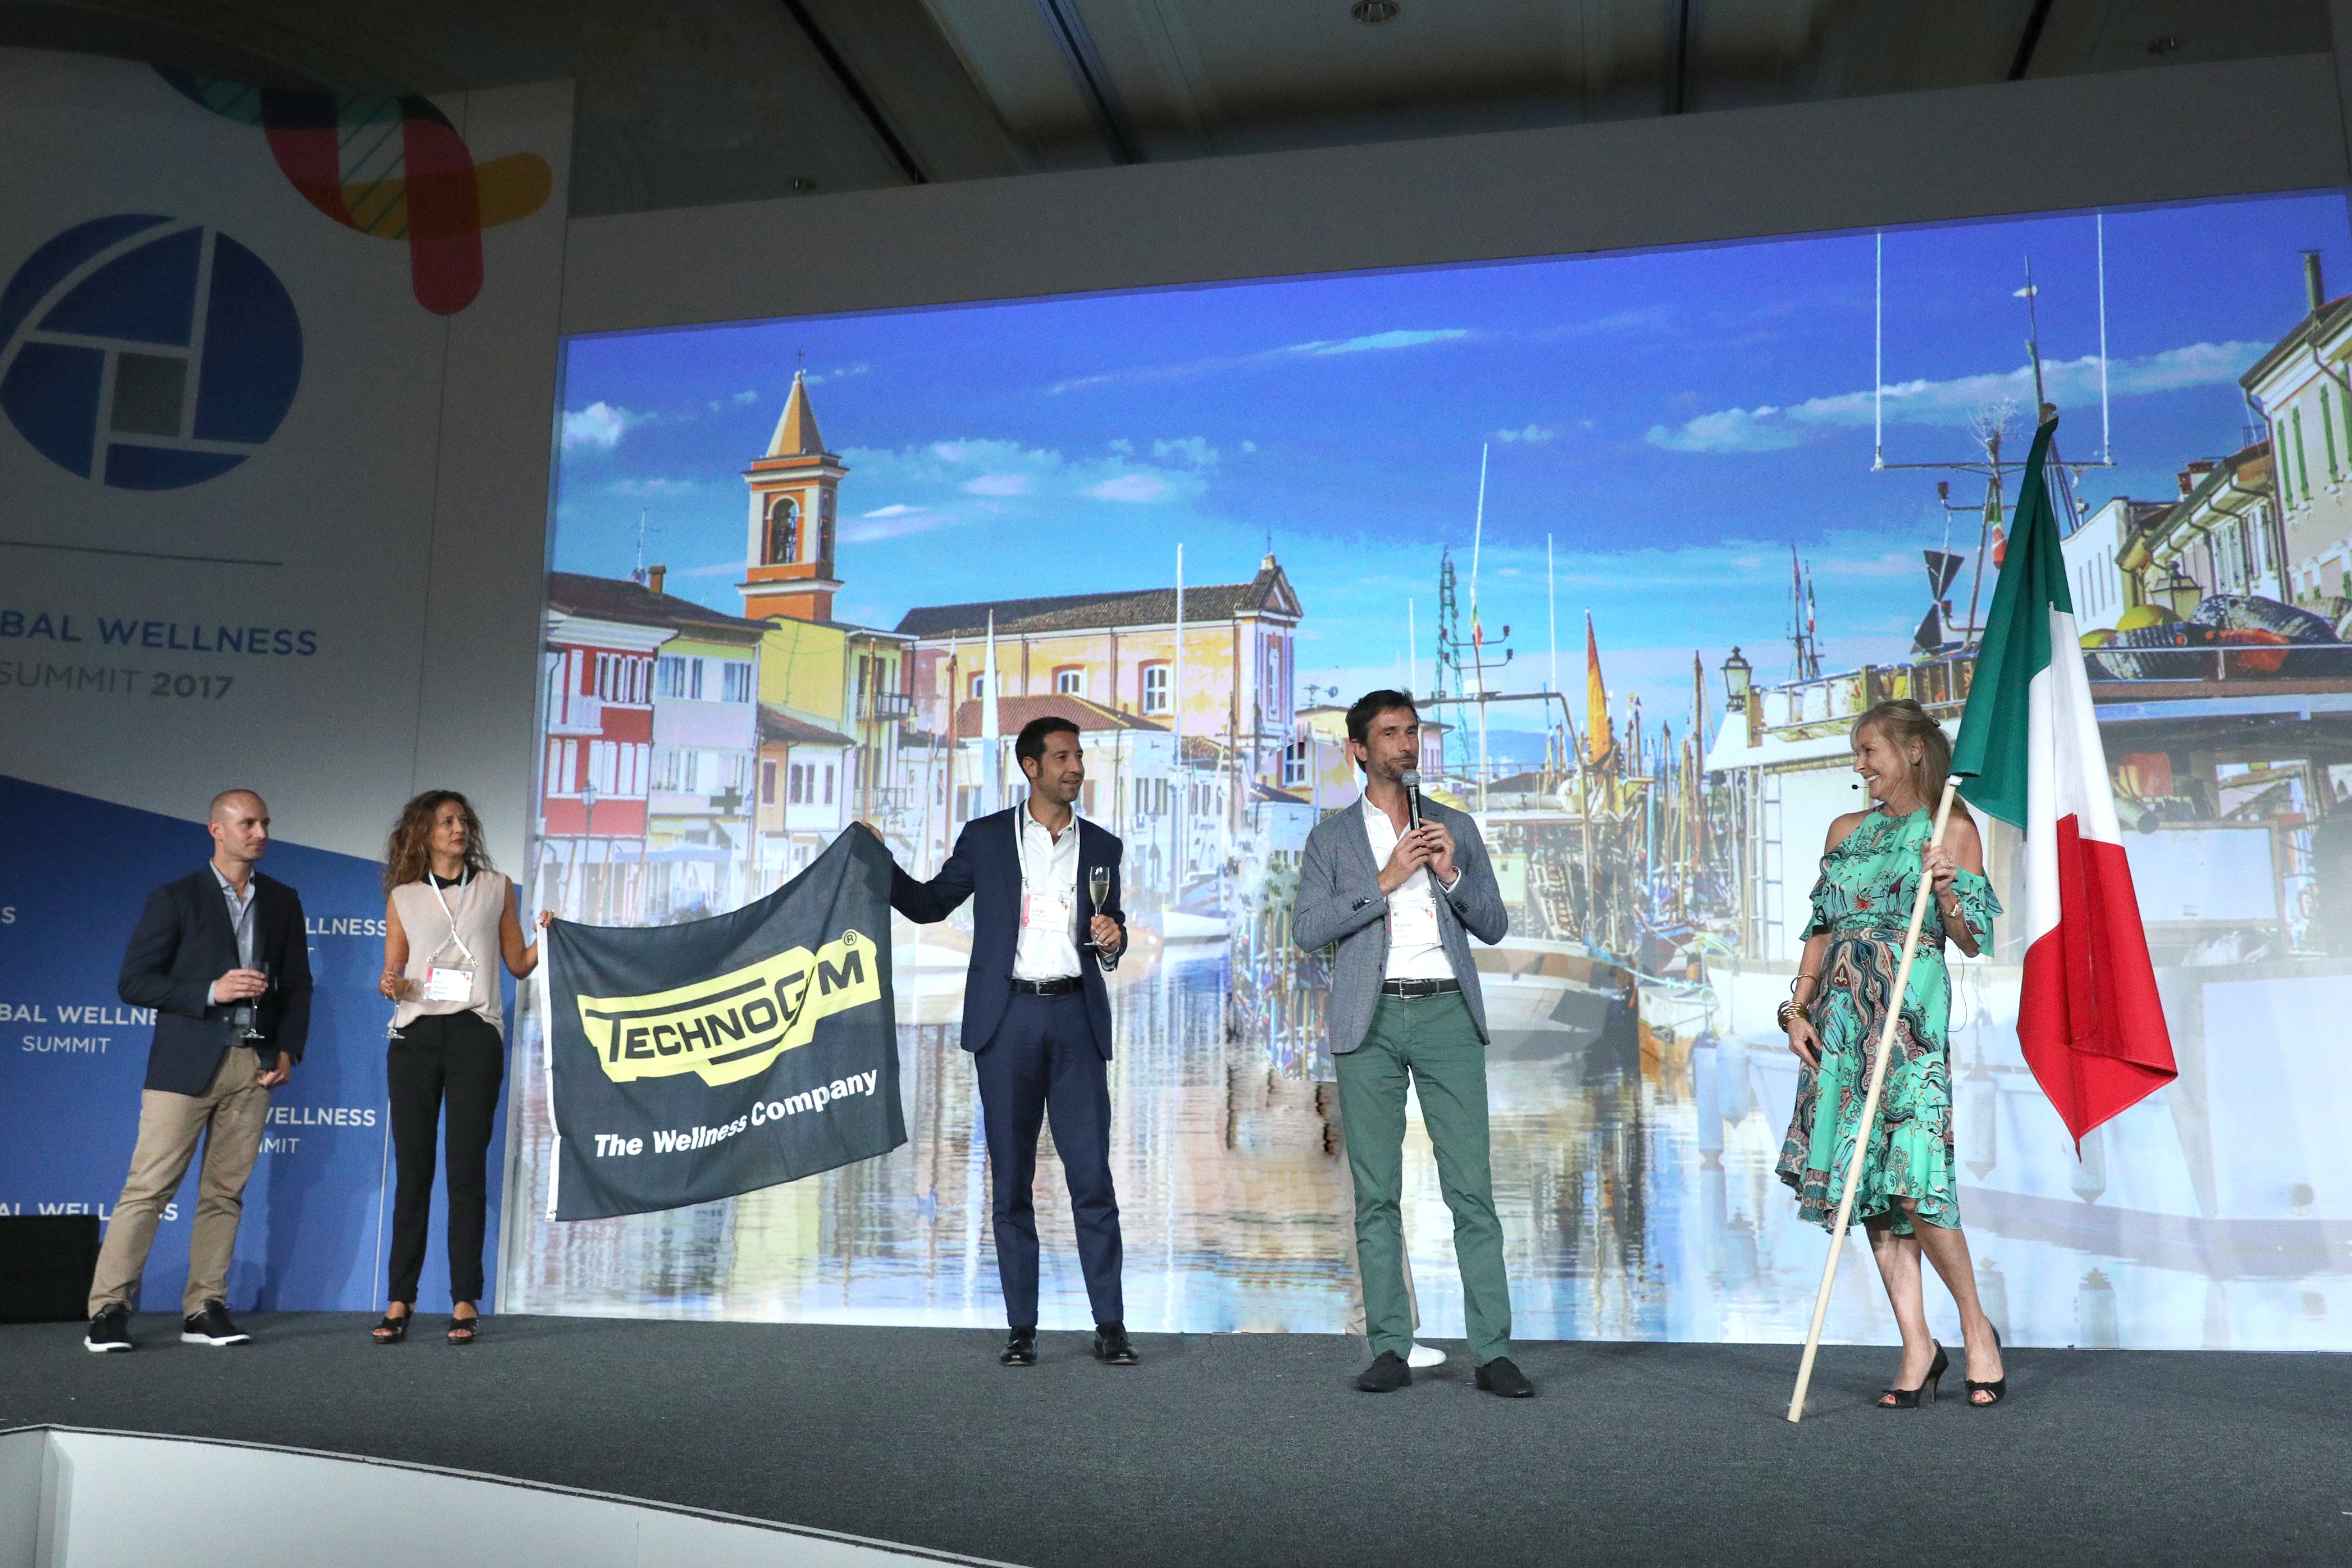 Susie Ellis (R), Chairman & CEO of the Global Wellness Summit, announces Technogym to host 2018 Summit at the Technogym Village in Cesena, Italy.